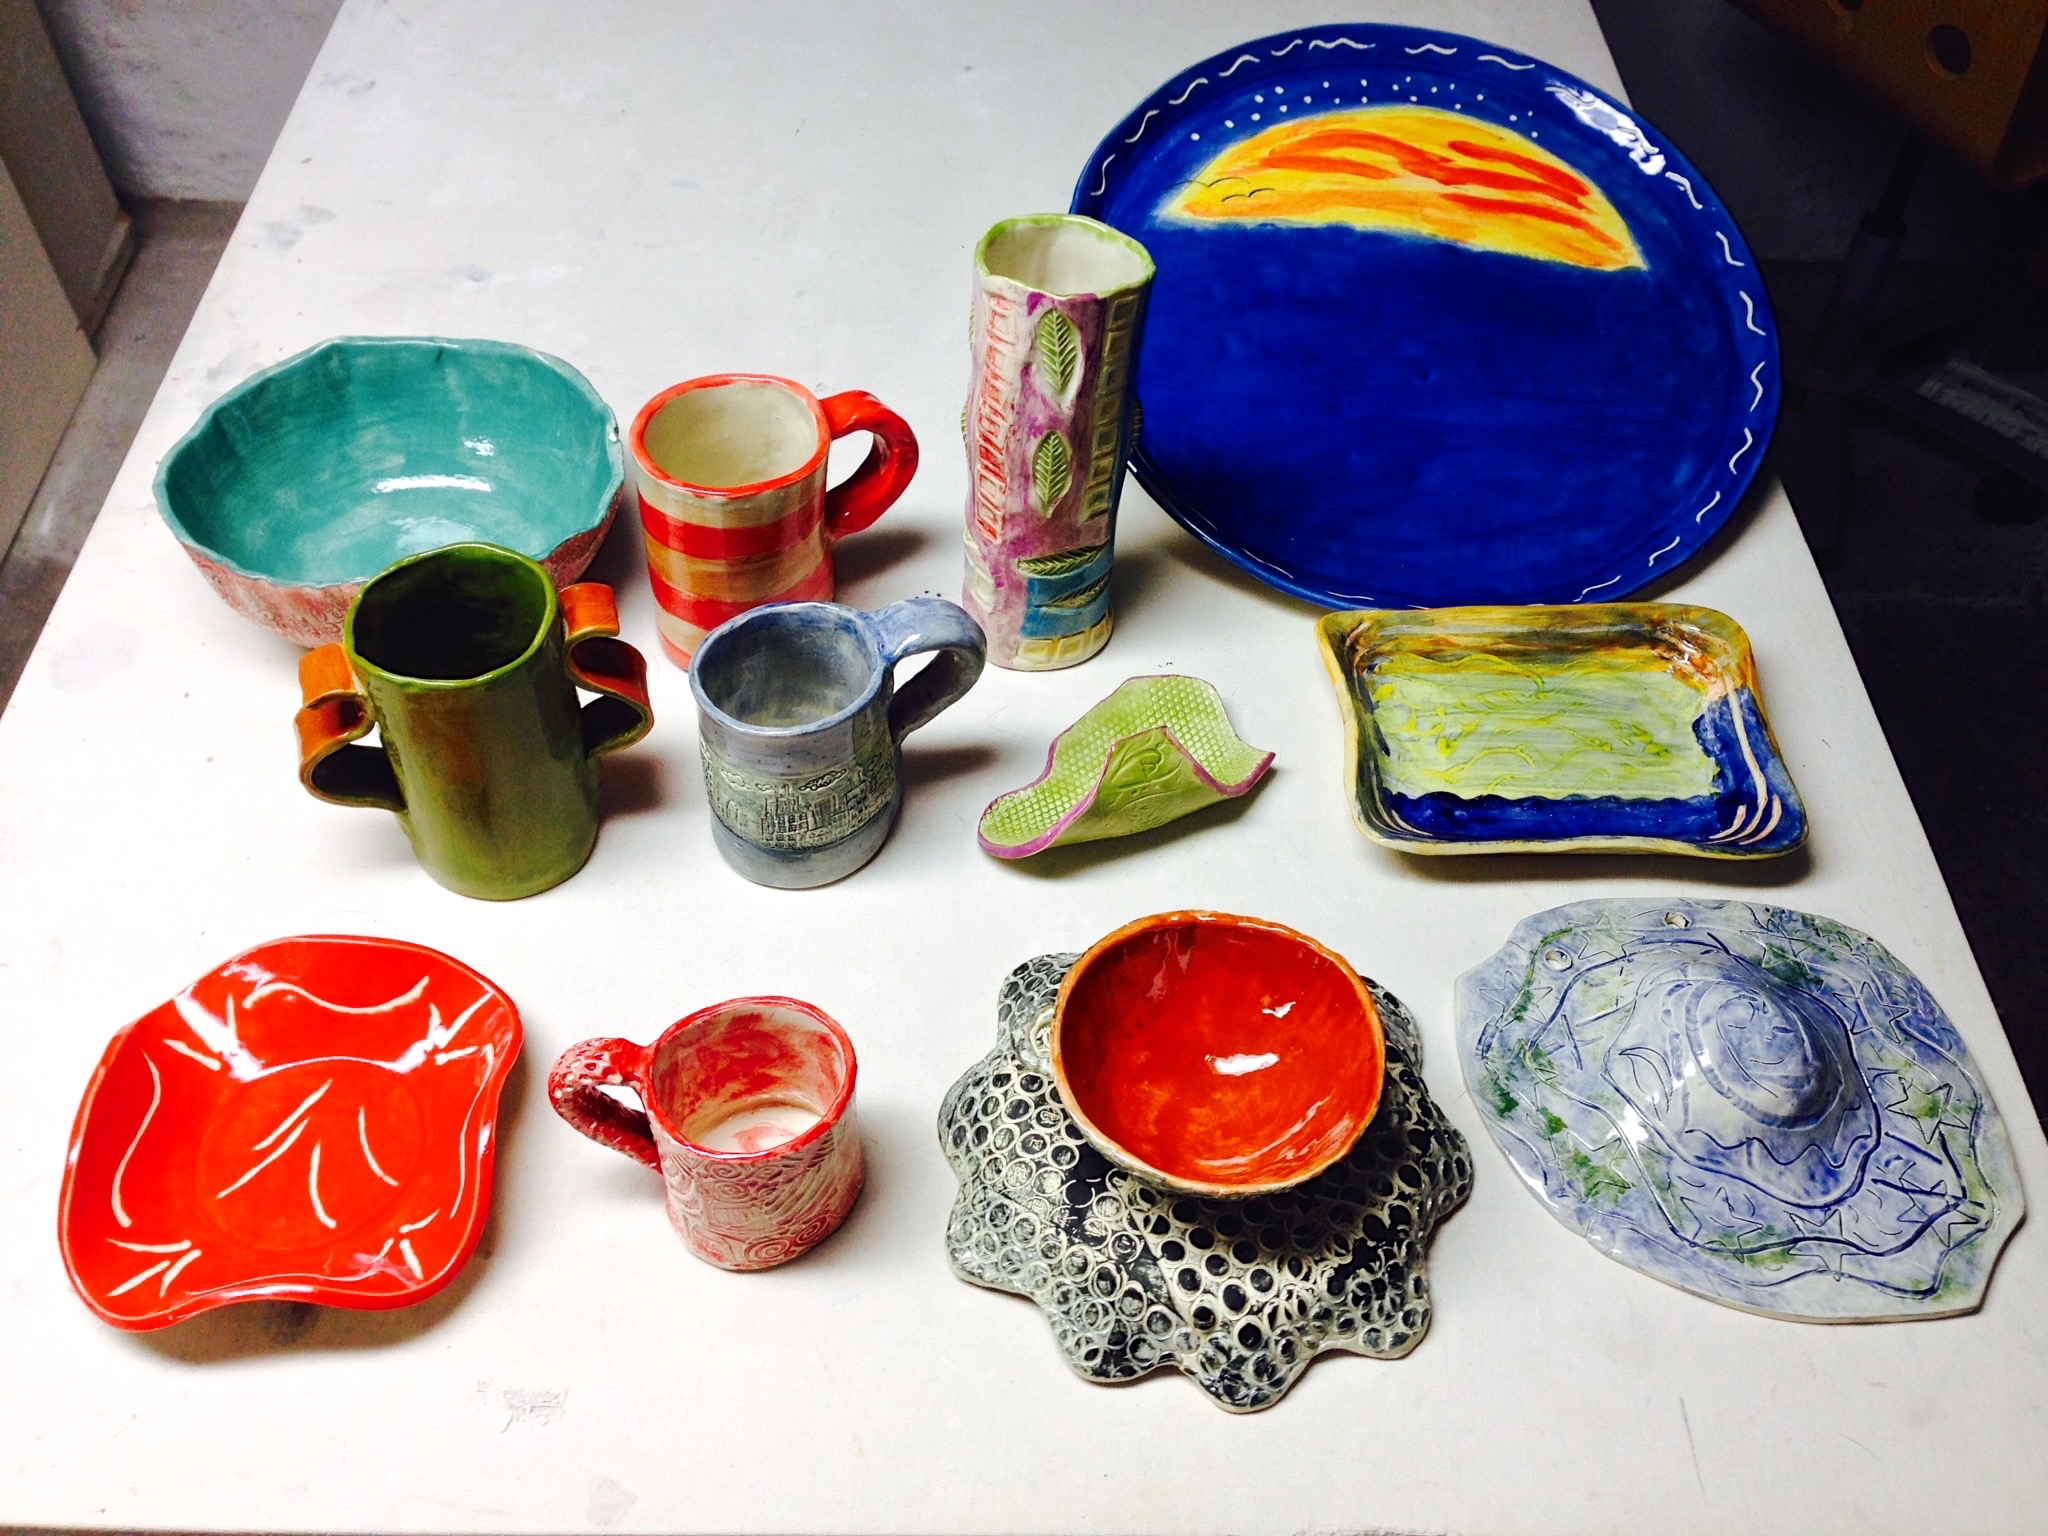 Yes, a rookie ceramic student made these and more in a 6 week class!